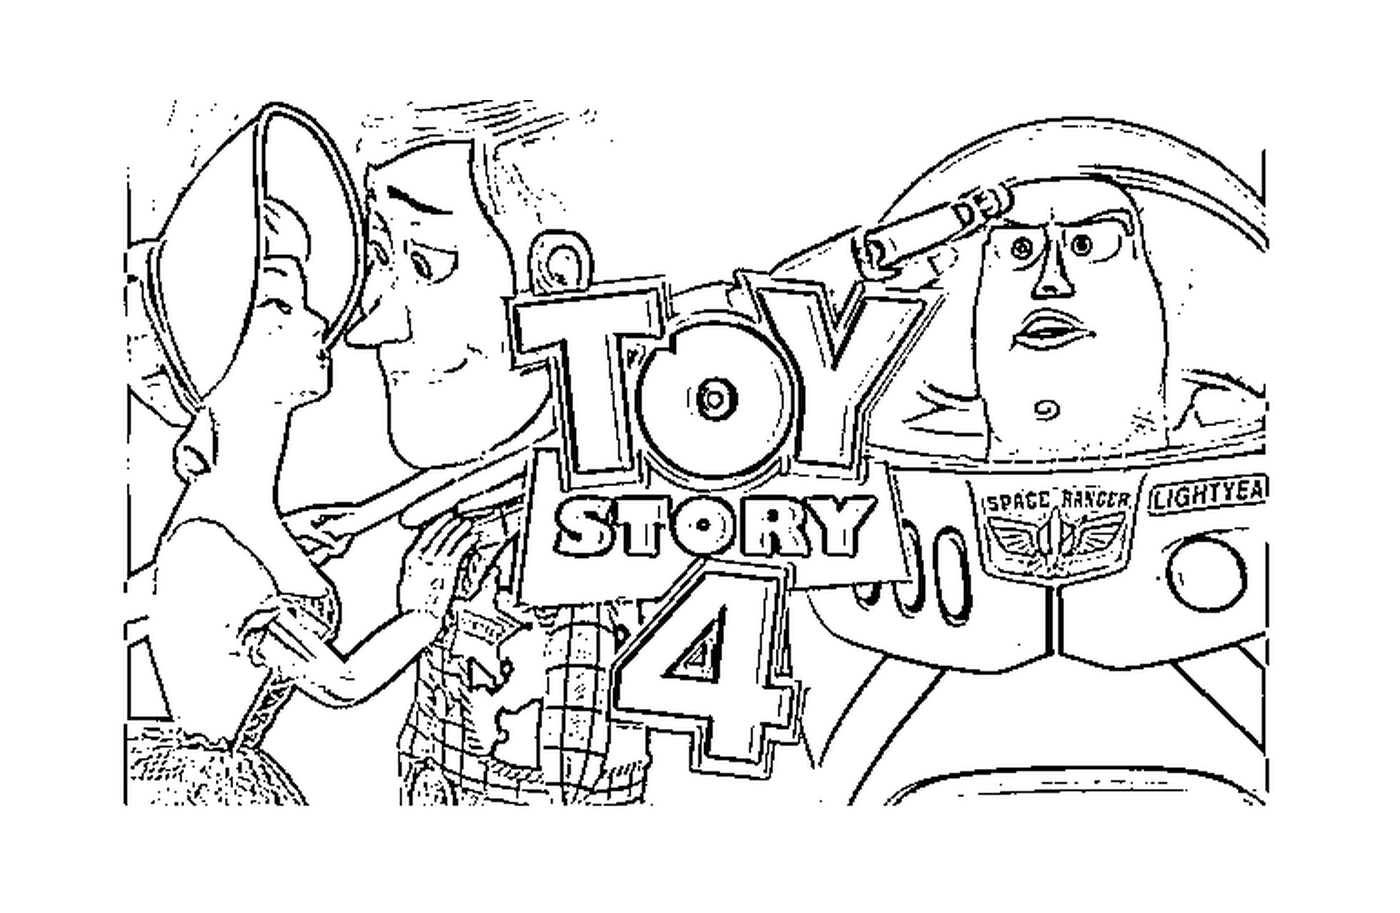  Toy Story 4, spannendes neues Abenteuer 